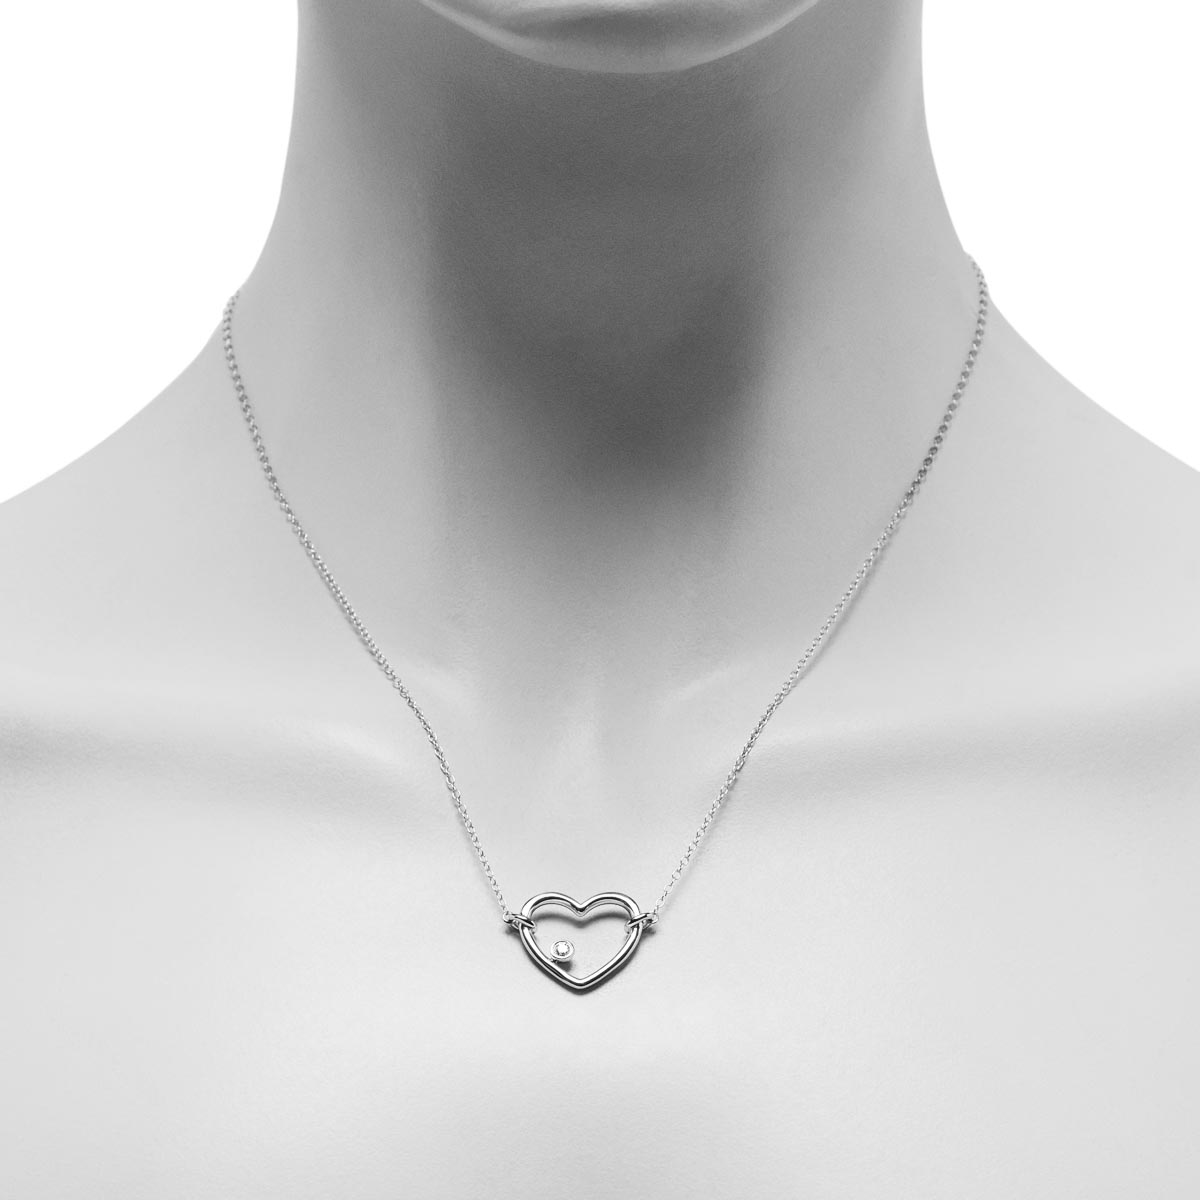 Northern Star Diamond Heart Necklace in Sterling Silver (1/20ct)